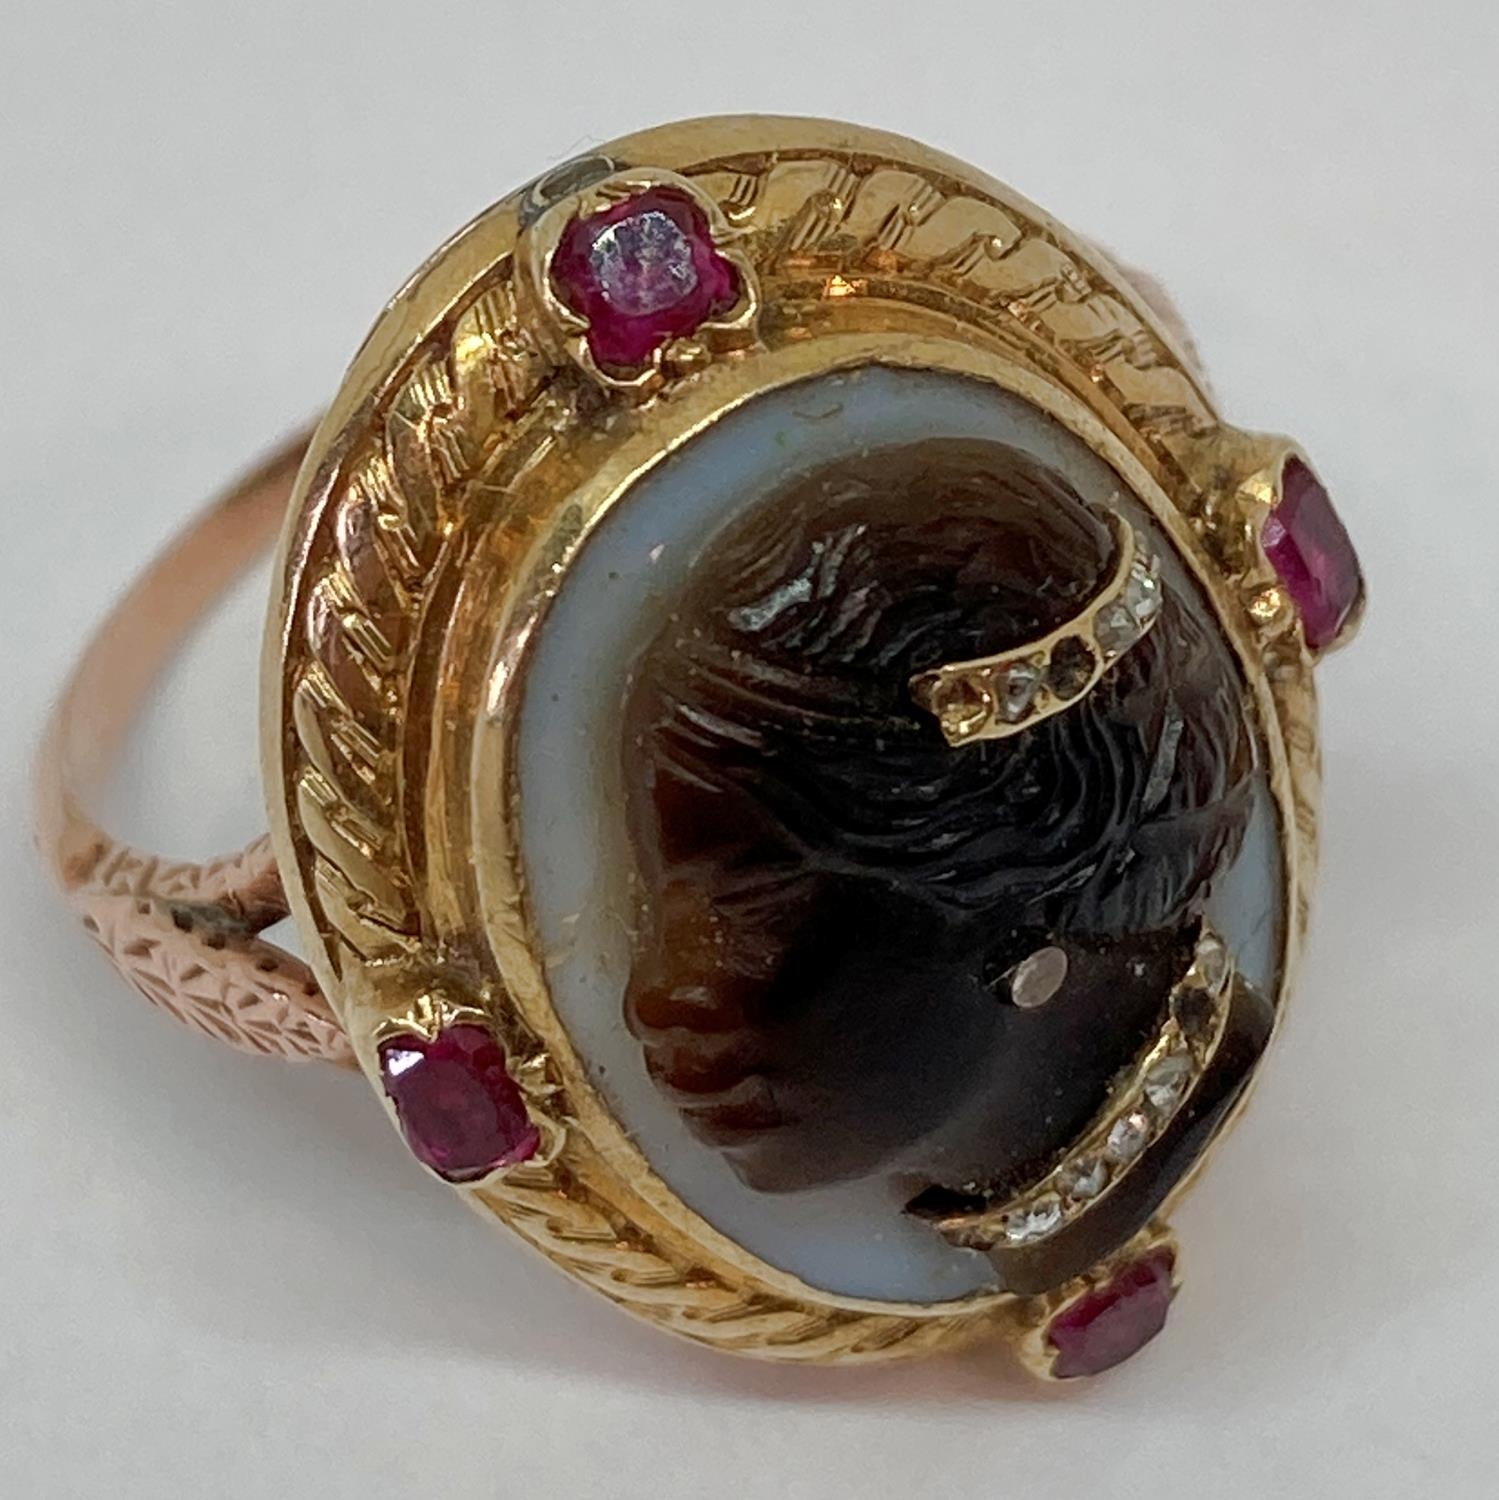 Fine antique blackamoor cameo ring depicting a lady, the agate cameo set with rose cut diamonds - Image 8 of 9